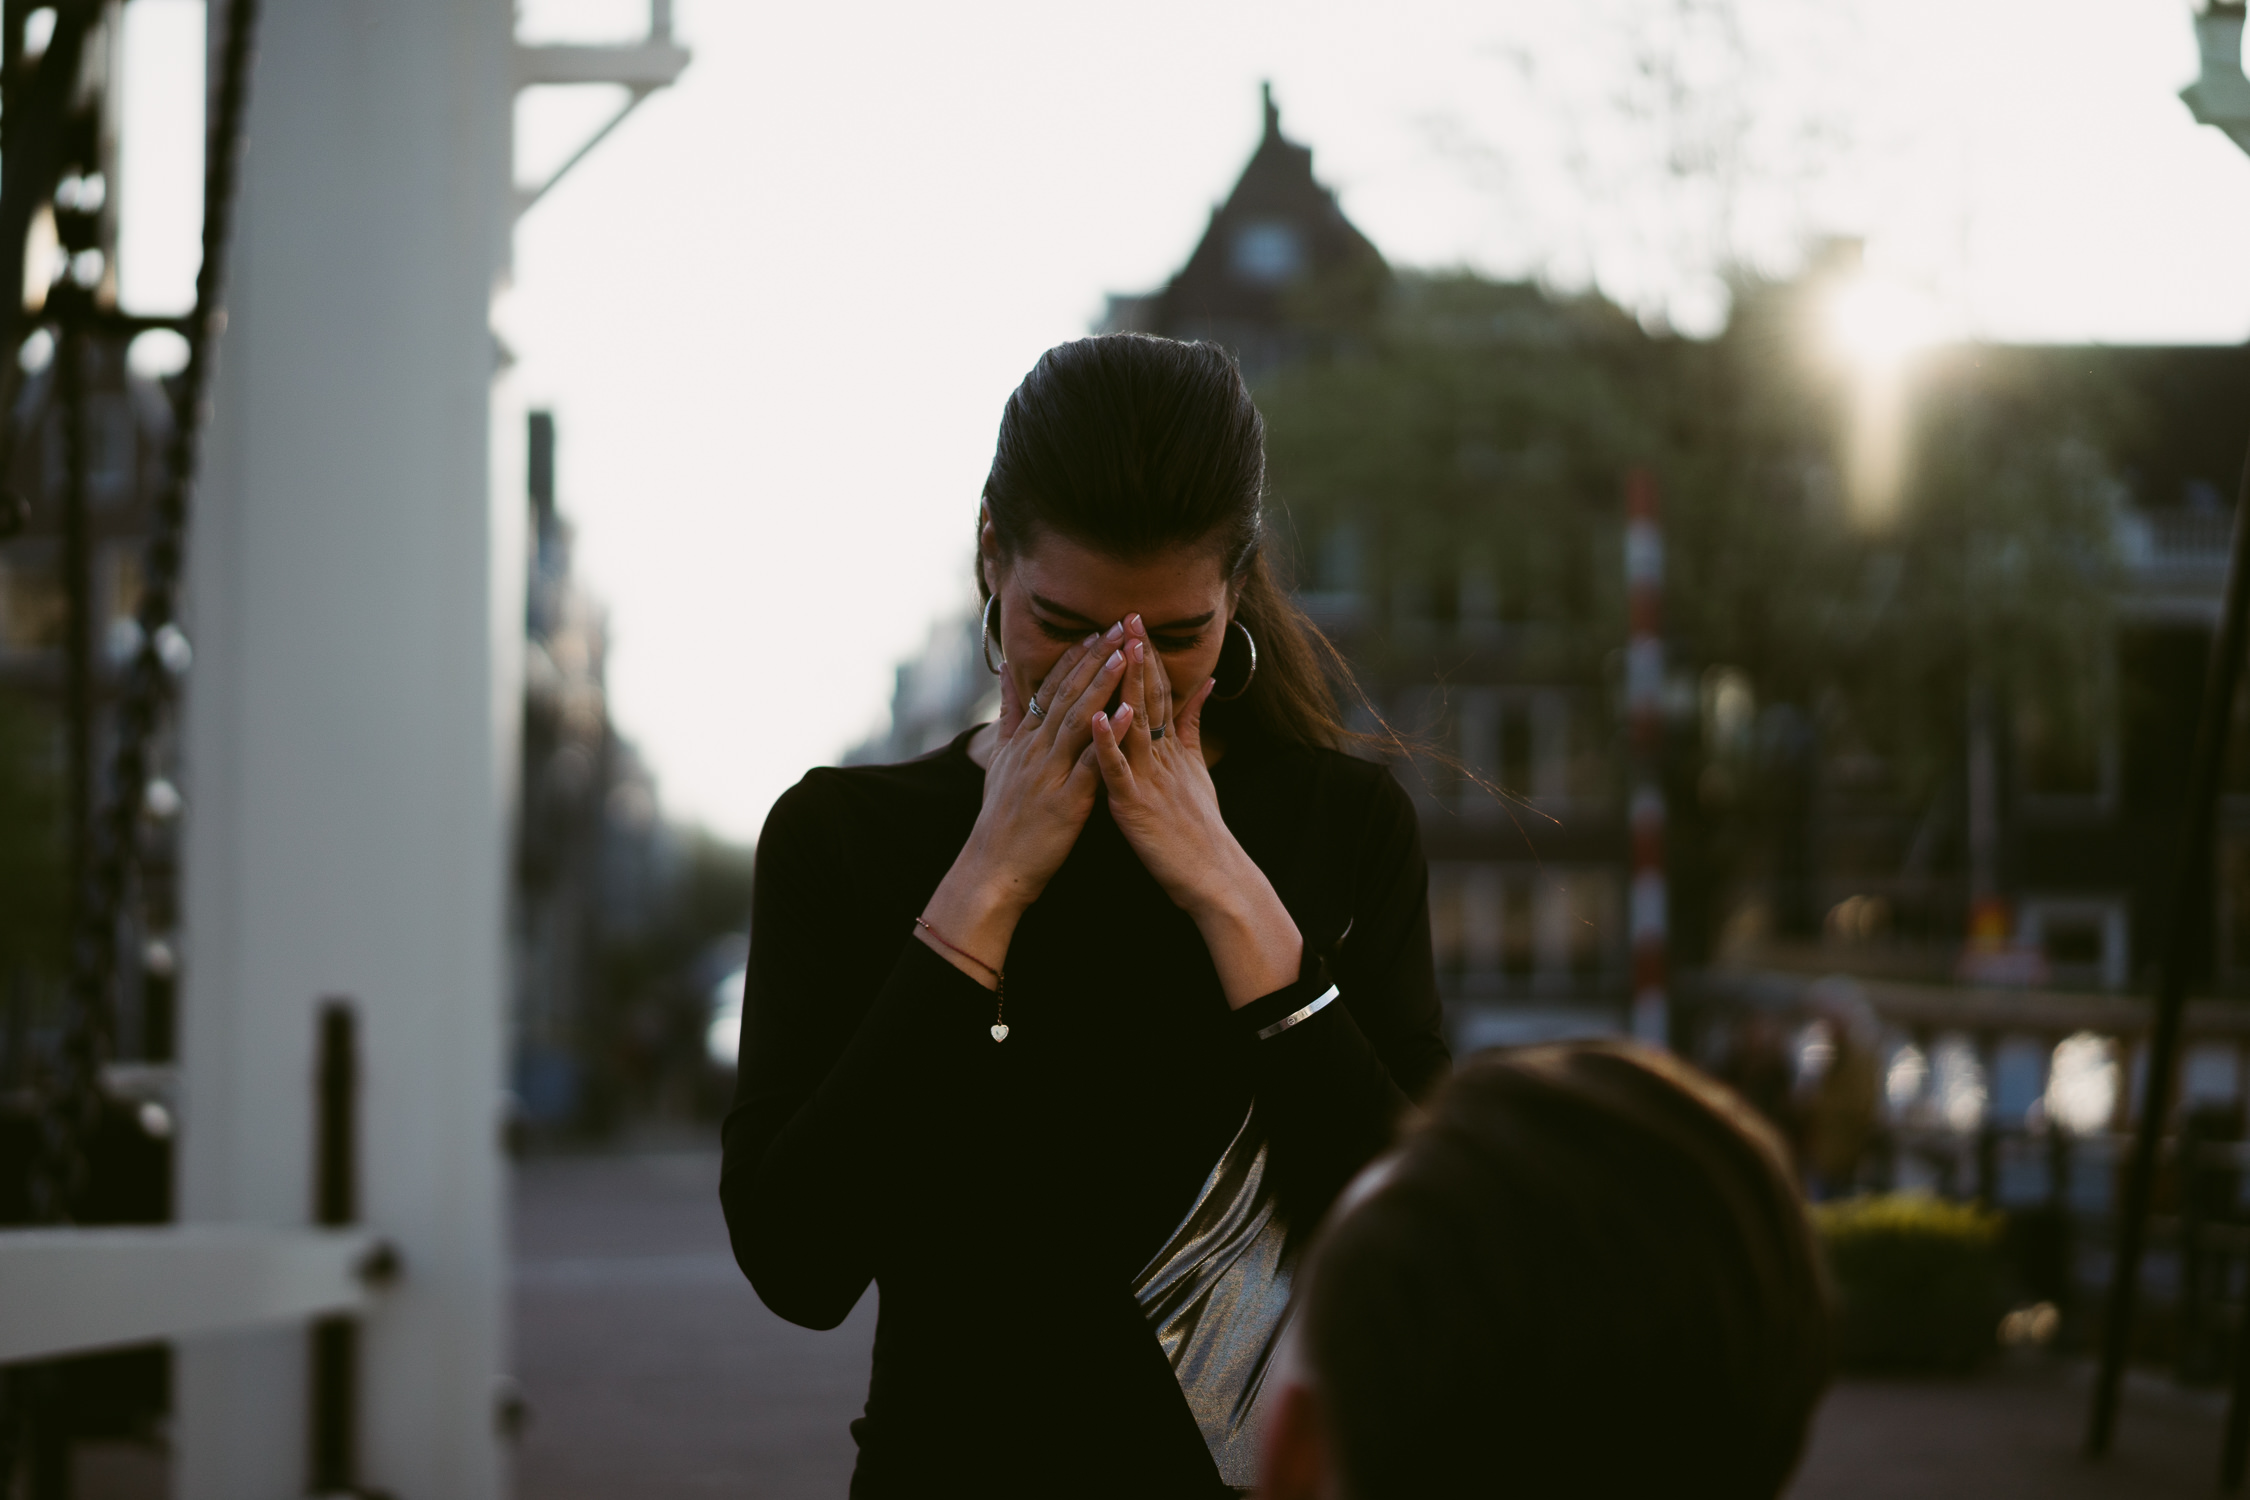 engaged on a loveshoot at magere brug amsterdam